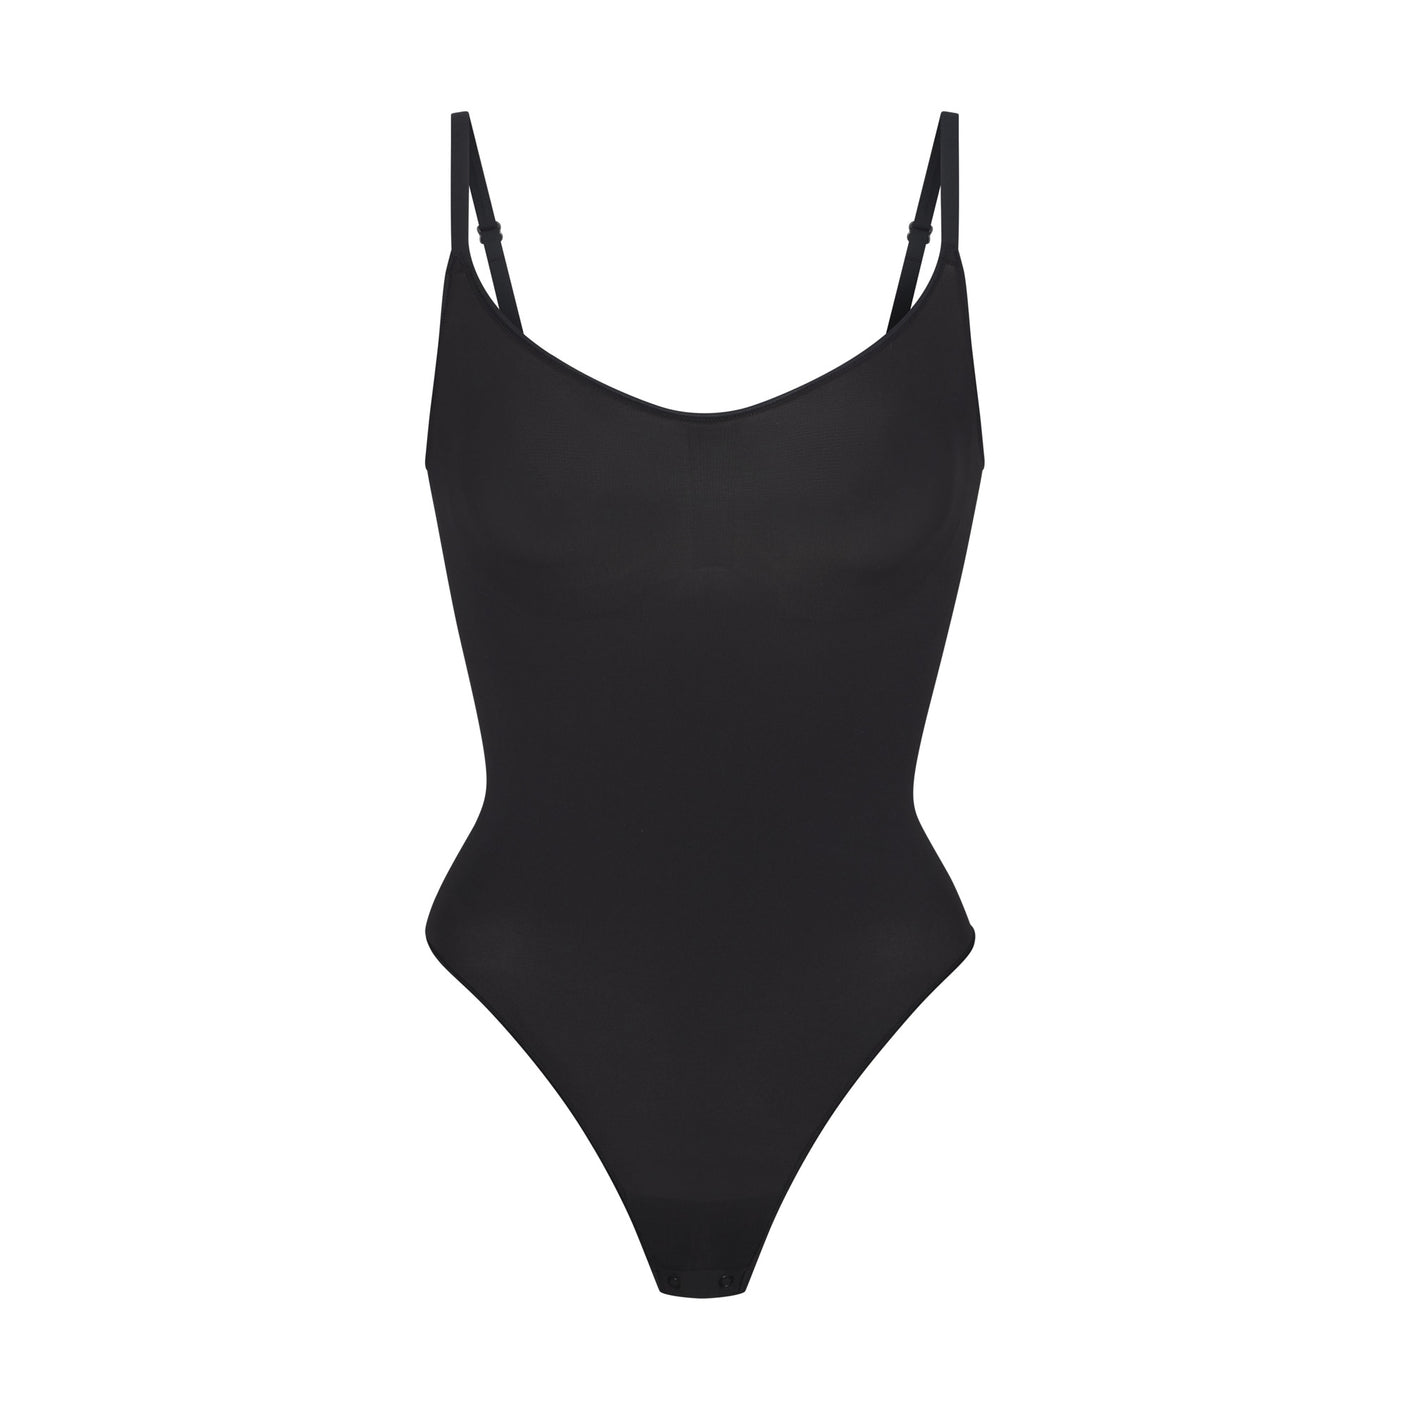 SKIMS Seamless Sculpt Mid Thigh Bodysuit in Espresso Brown NIB Size M - $61  New With Tags - From Bri